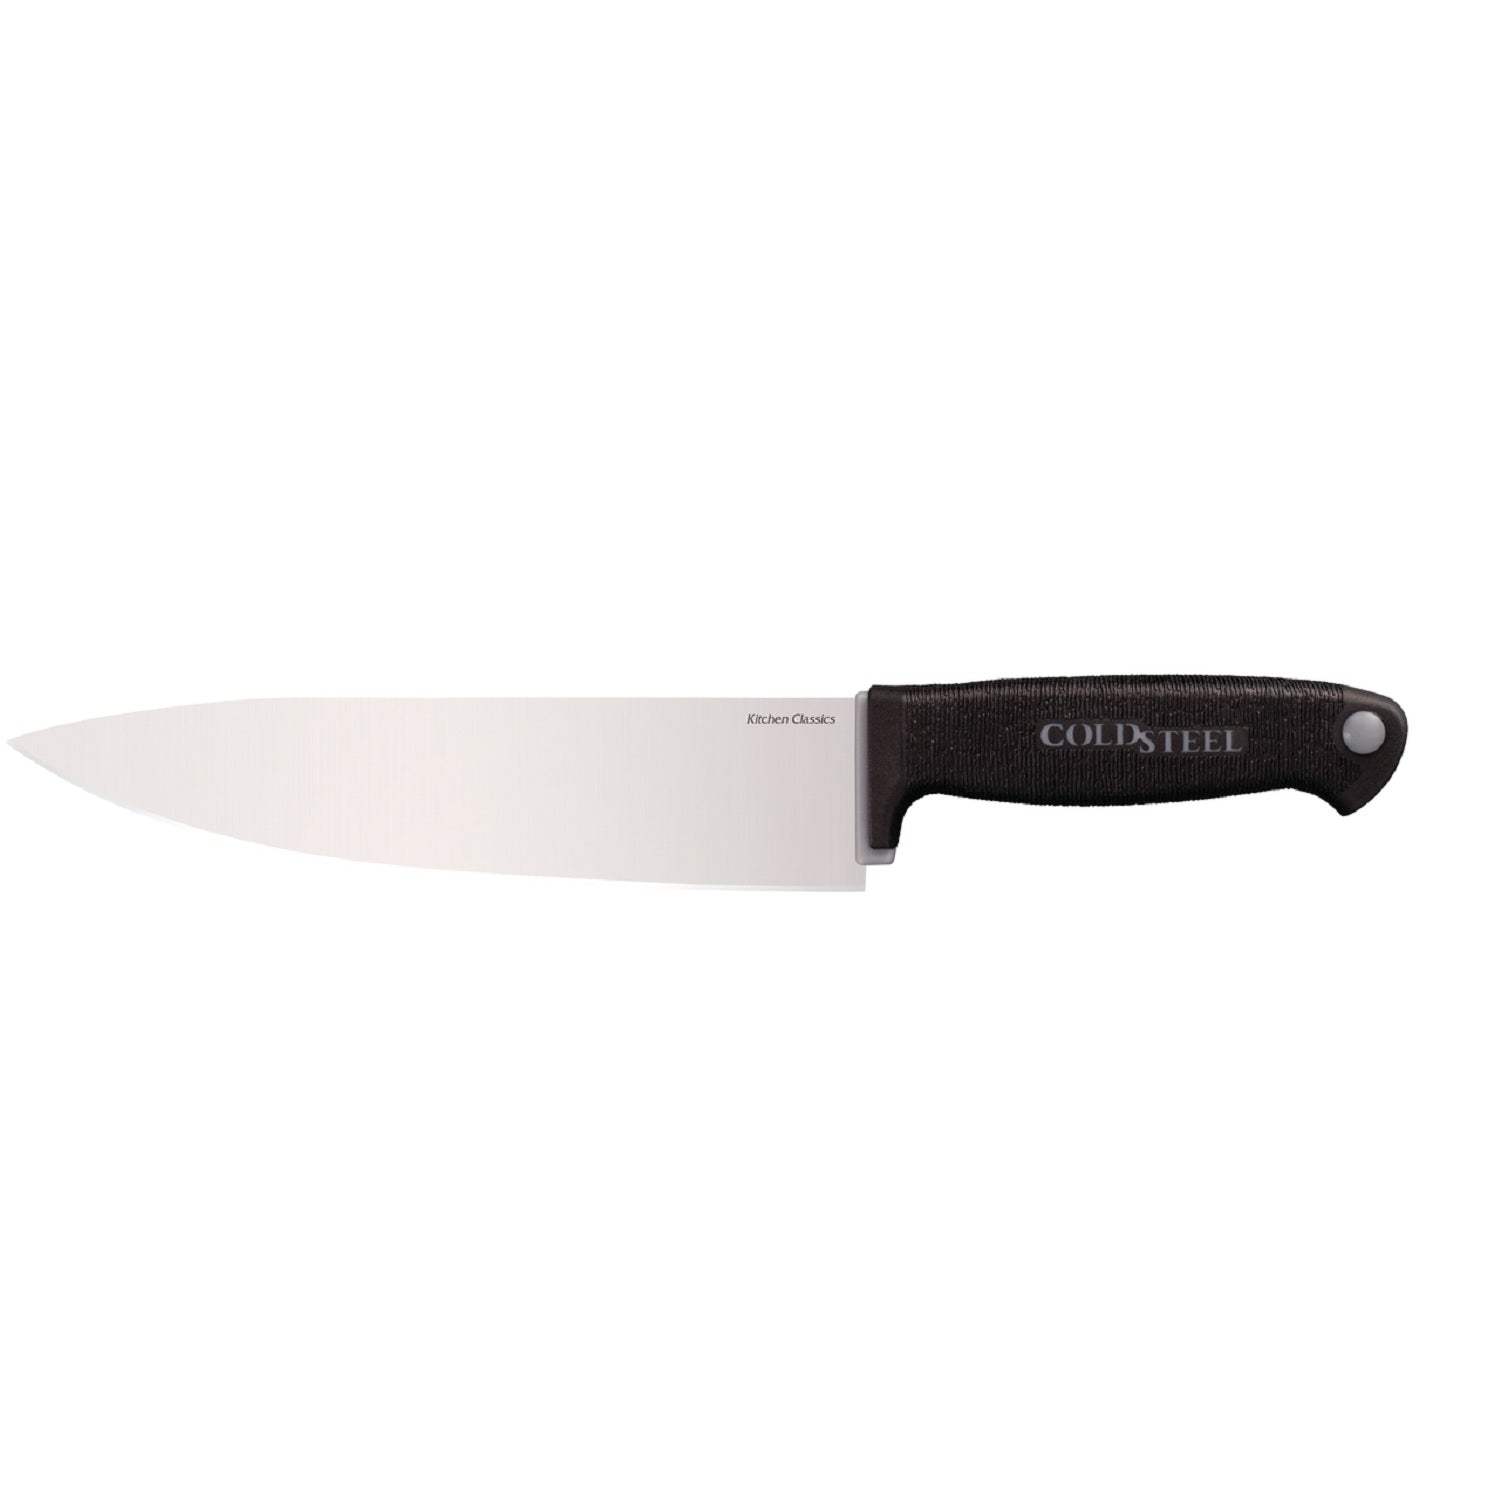 Cold Steel Chefs Knife 8.0 in Plain Polymer Handle